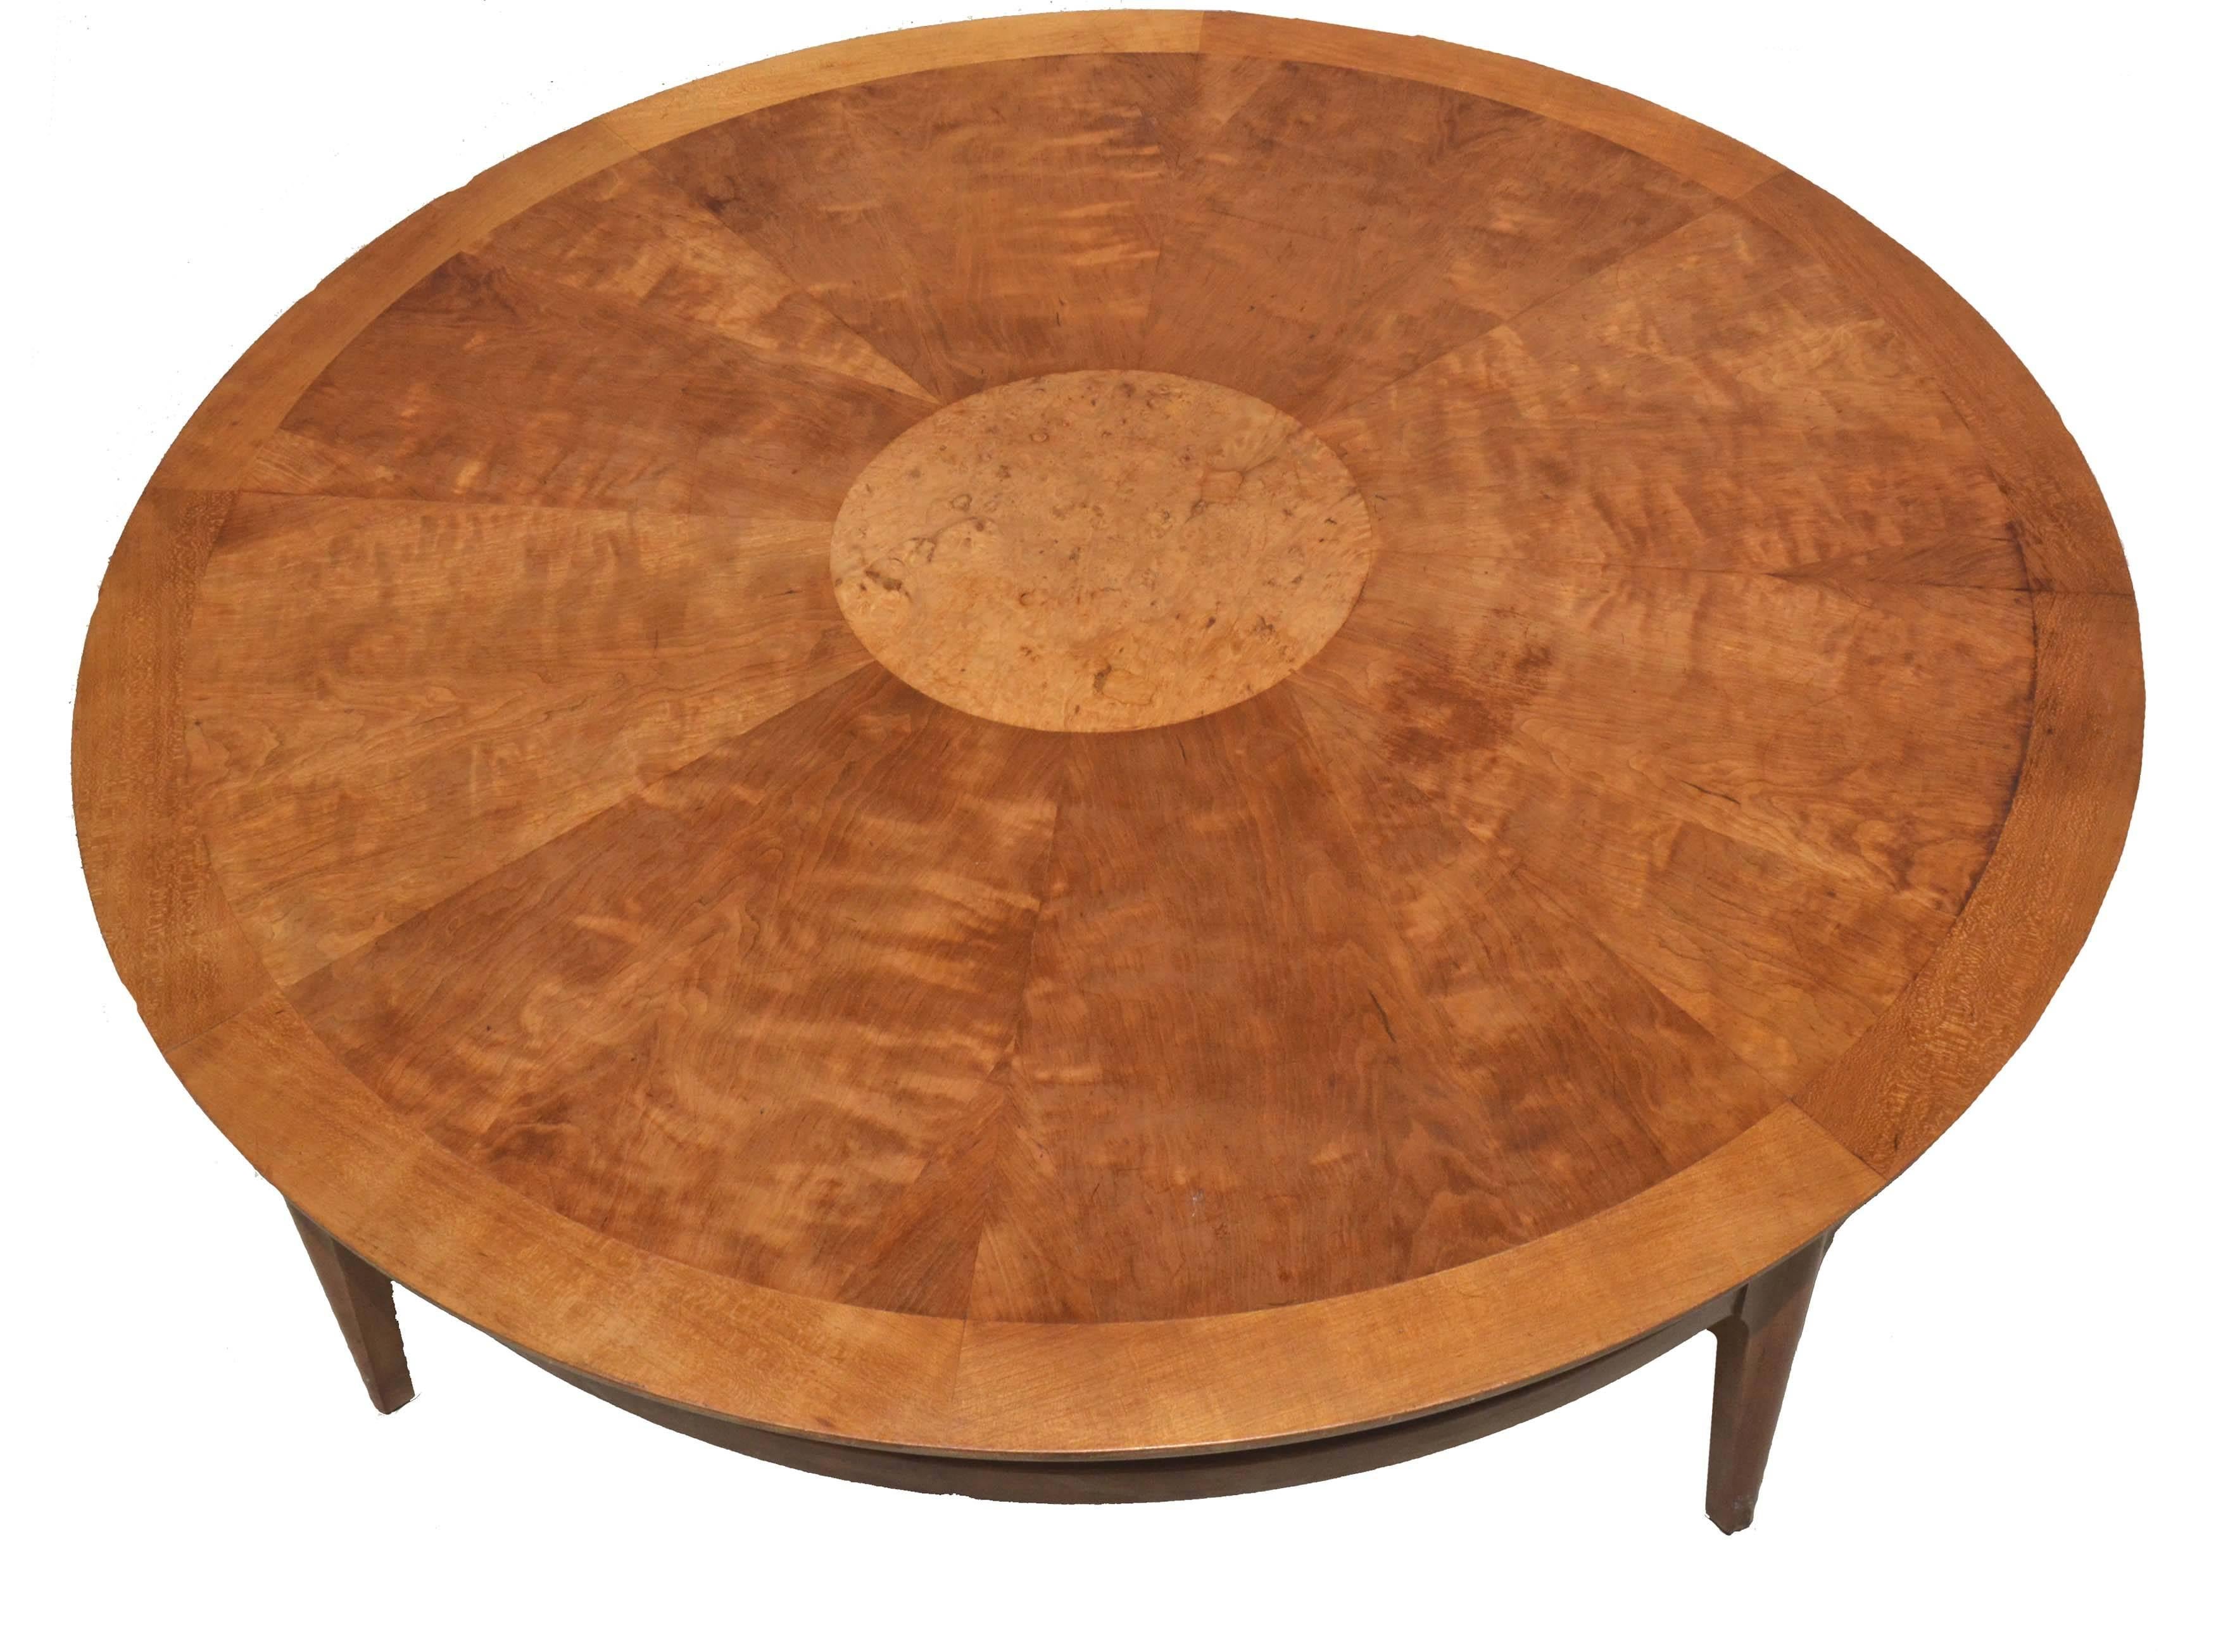 Mid-Century lane cocktail/coffee table with beautiful walnut and burl inlays. Serial number on verso. Condition: Very good; one small 1.50" abrasion to wood (see photo). Measurements: H: 14.75" x W: 38" x D: 38".
   